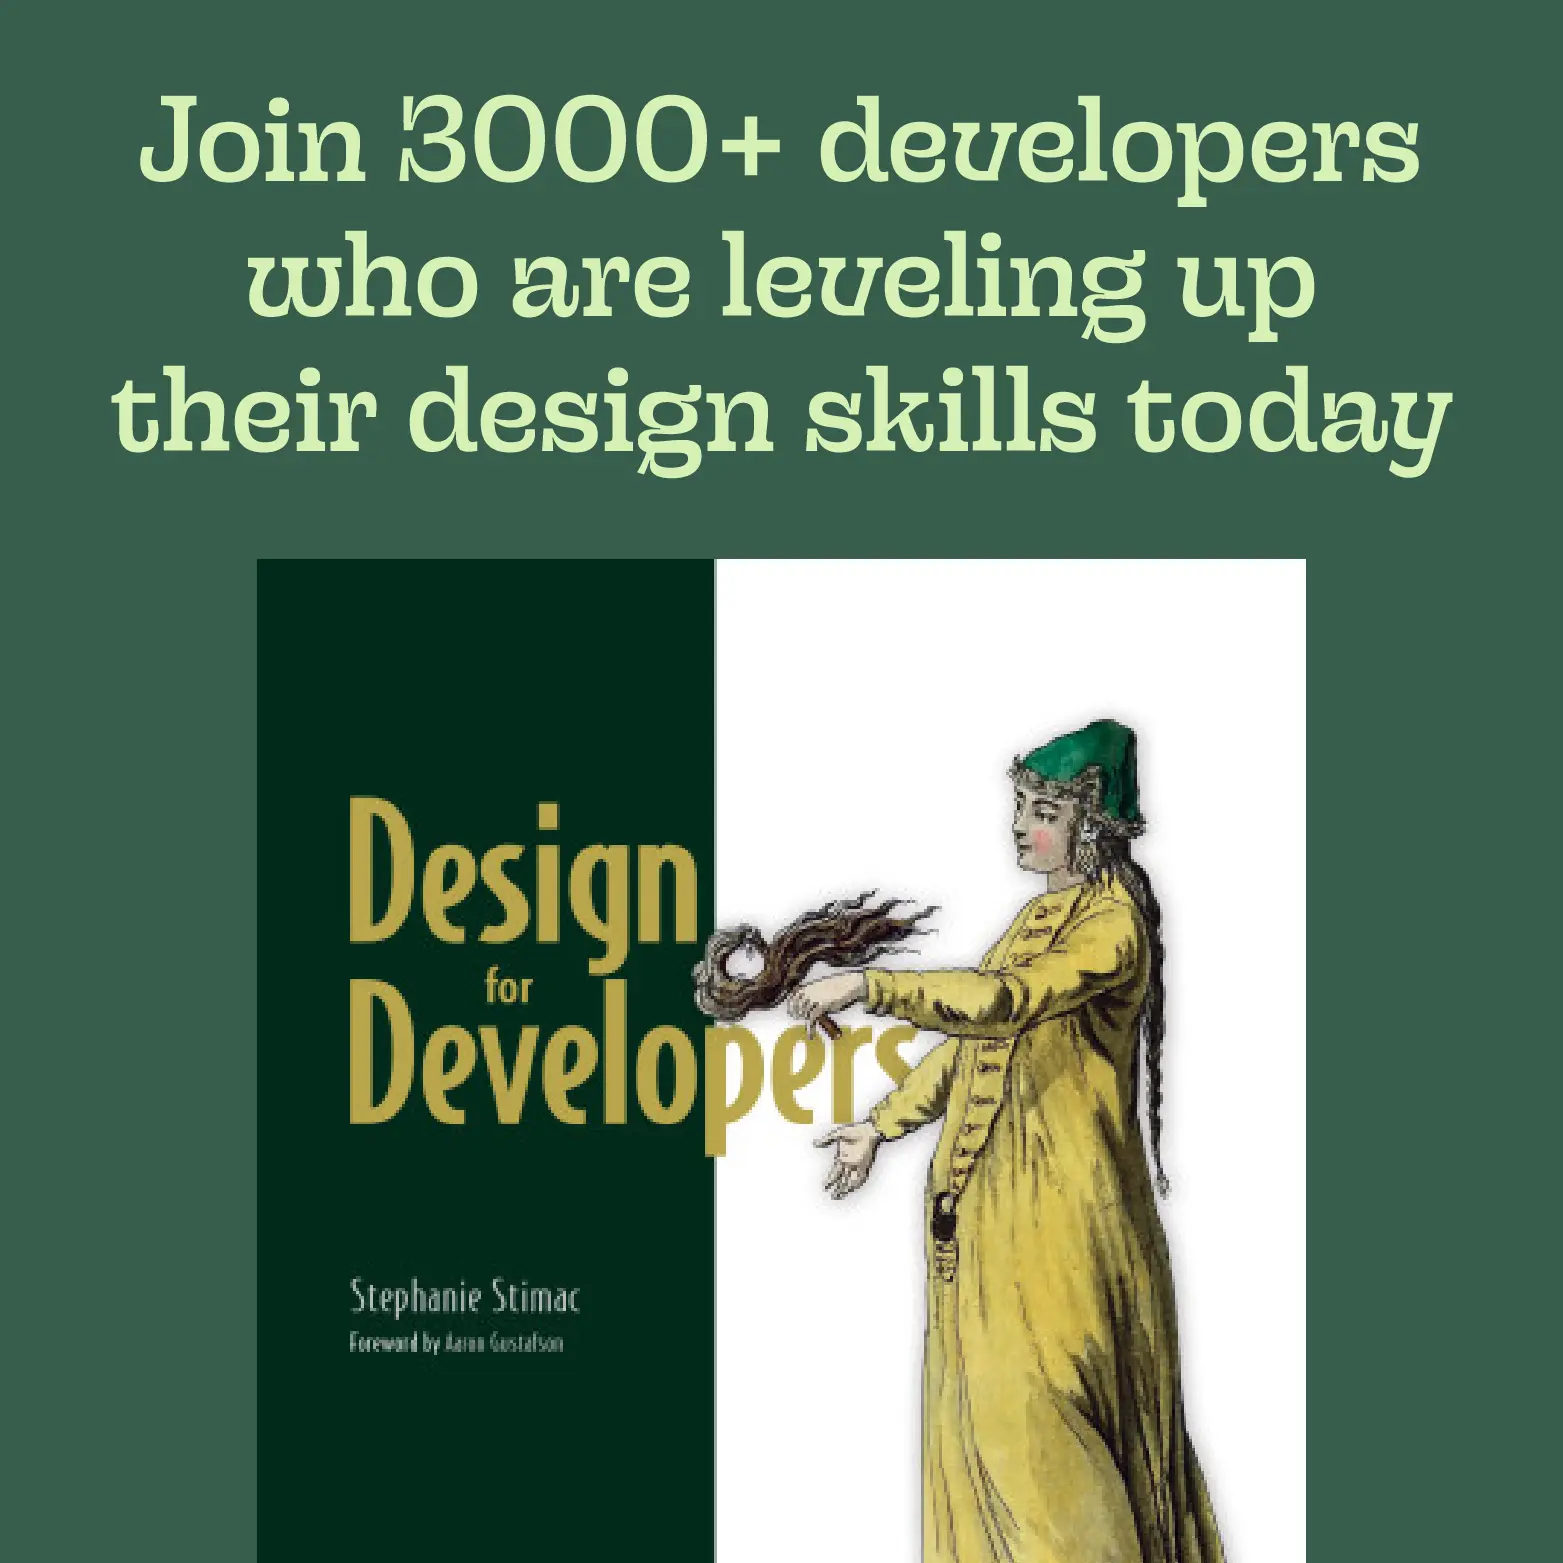 Text that reads 'Join 3000+ developers who are leveling up their design skills today' followed by the book cover for Design for Developers